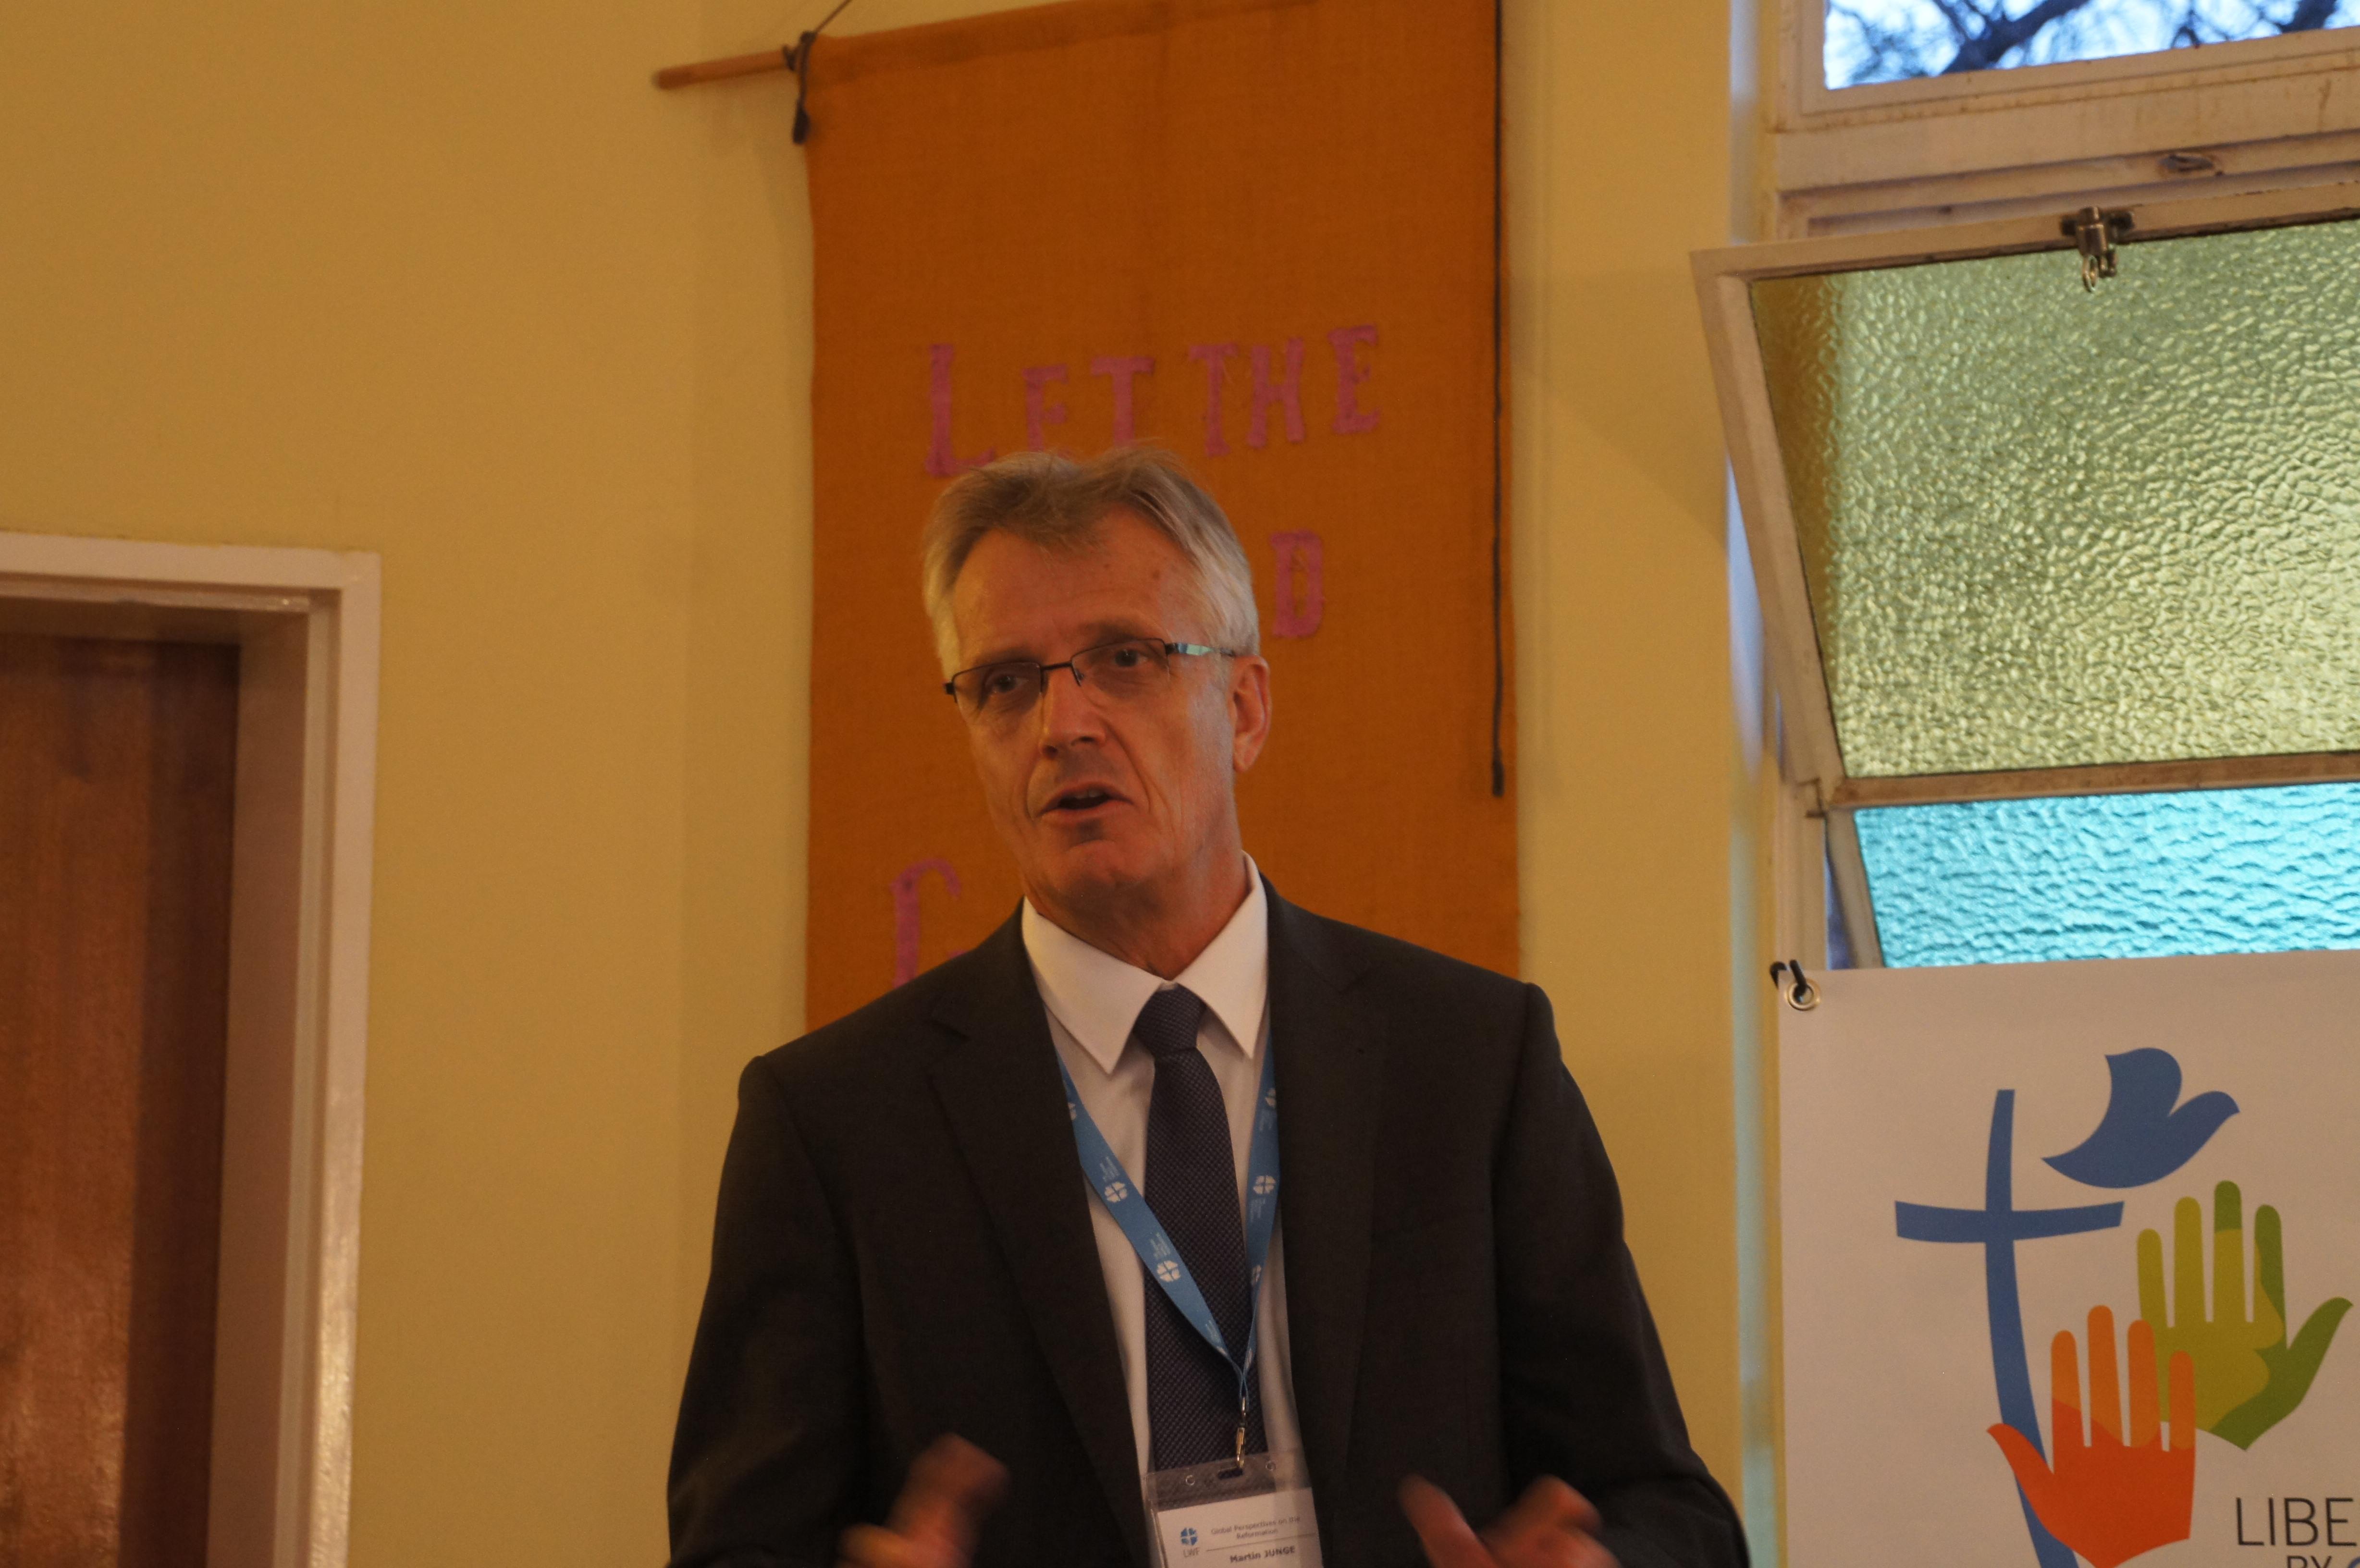 LWF General Secretary Rev. Dr Martin Junge tells participants at the Global Perspectives on the Reformation conference: uphold the importance of freedom as a key insight of Lutheran Reformation.  Photo: LWF/I. Benesch 